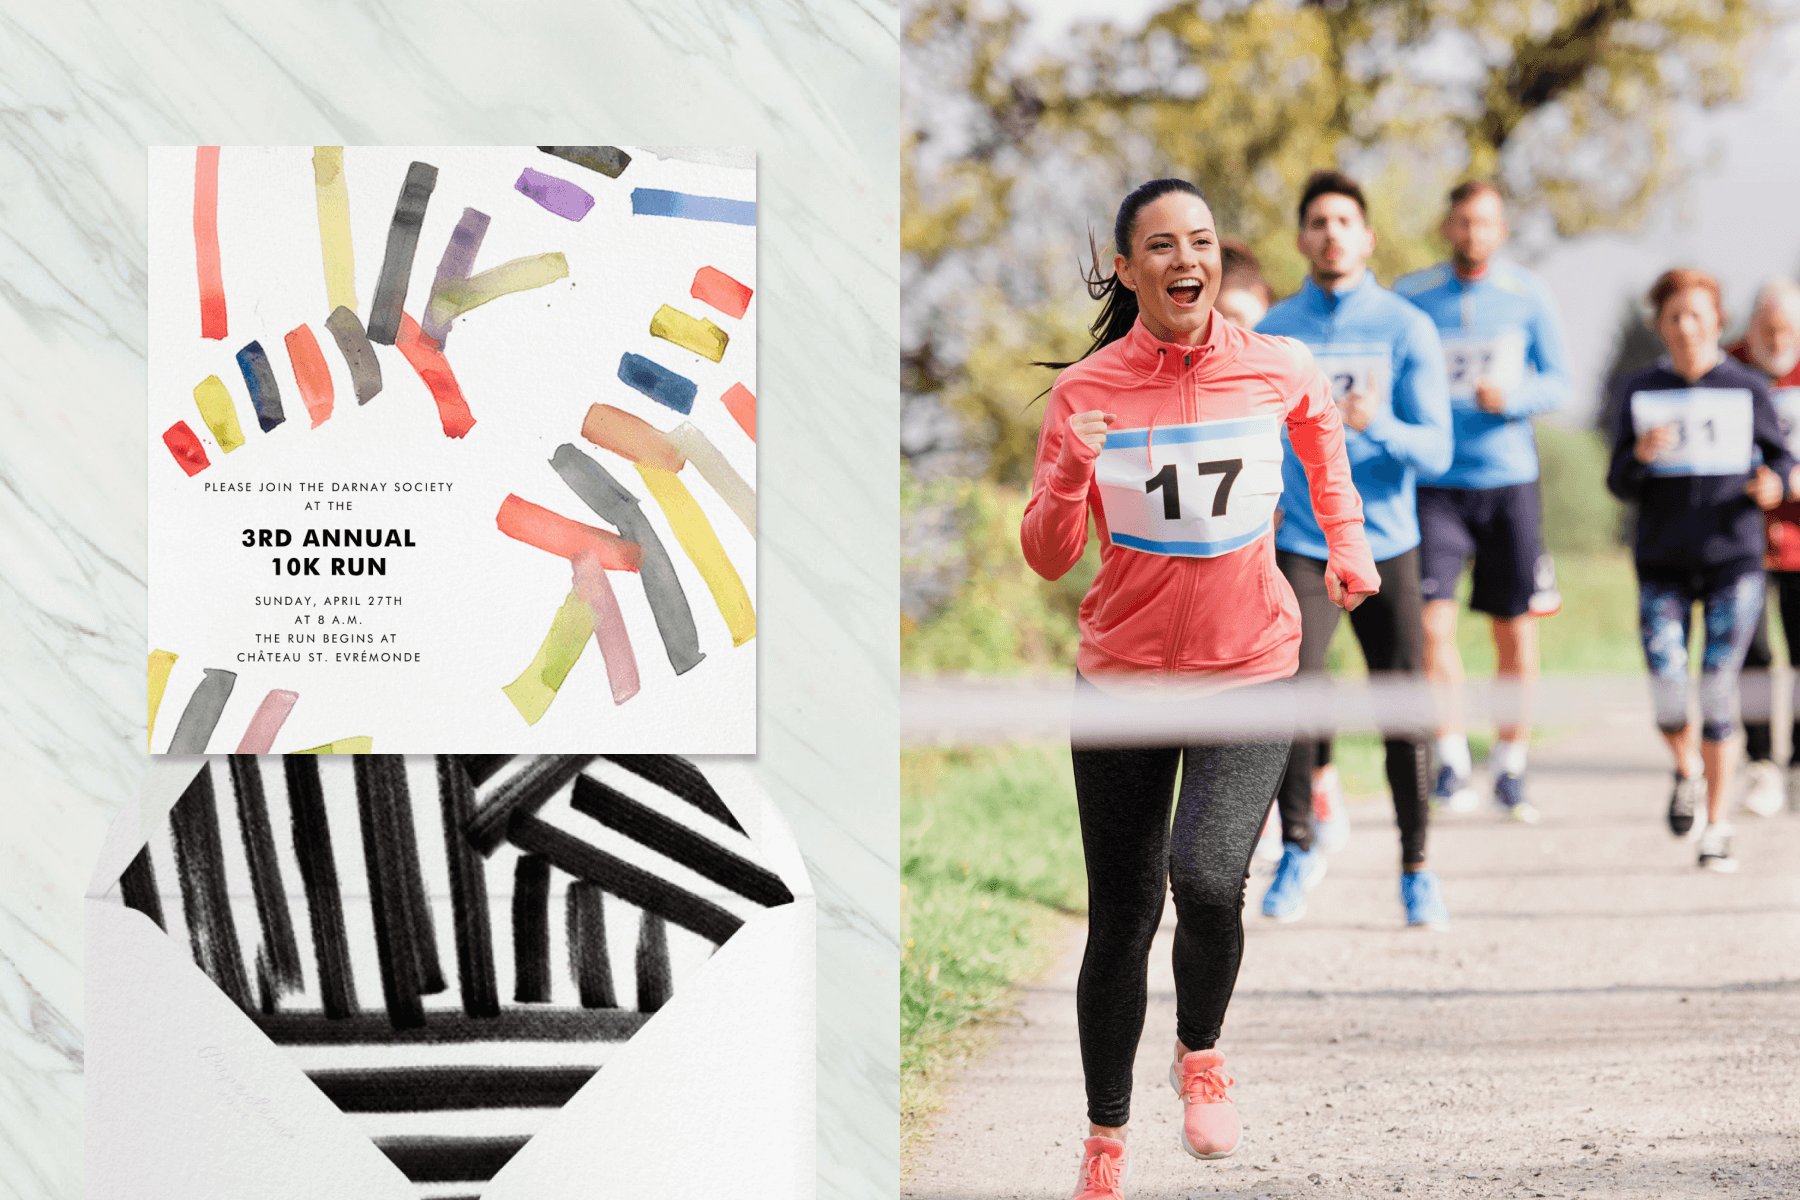 Left: A square invitation for a 10K run has imperfect, colorful watercolor streaks on a white background and a white envelope with black and white streaked liner. Right: A woman in a pink track jacket and number 17 runs towards a finish line with several people also running in the background.